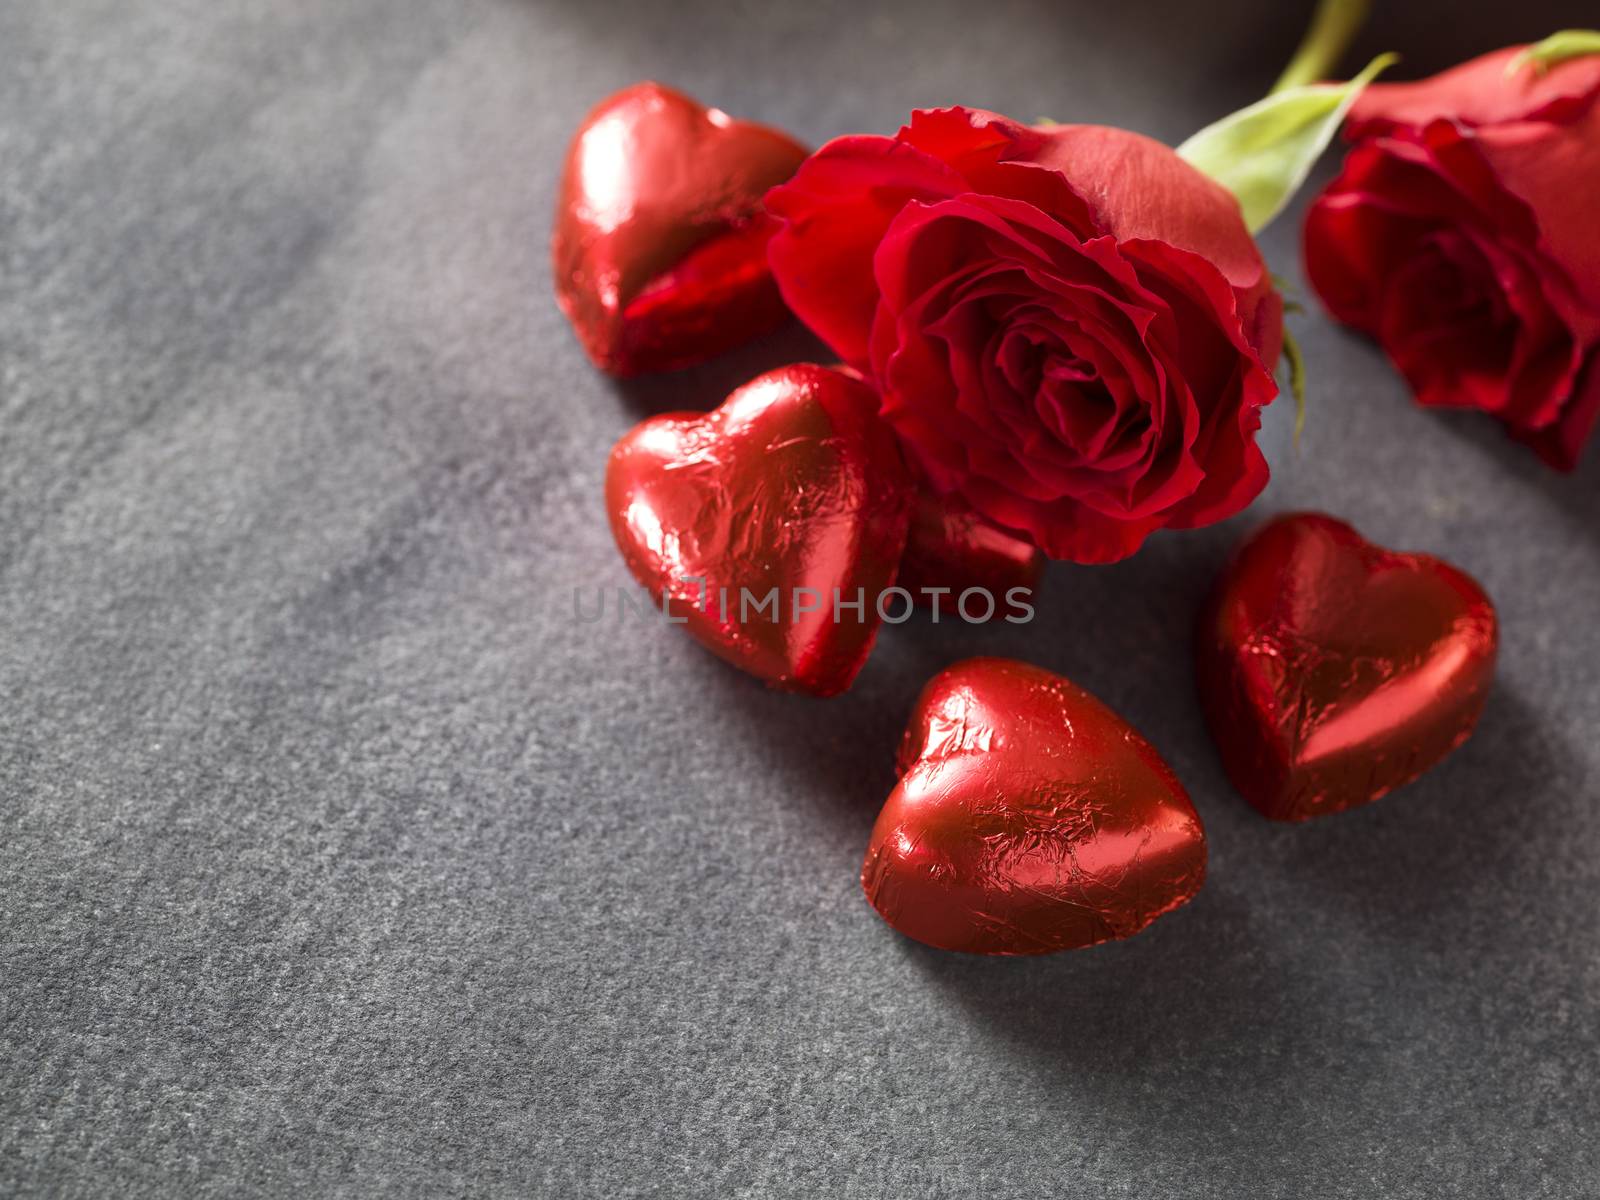 Roses with chocolate hearts on a weddings day background by janssenkruseproductions